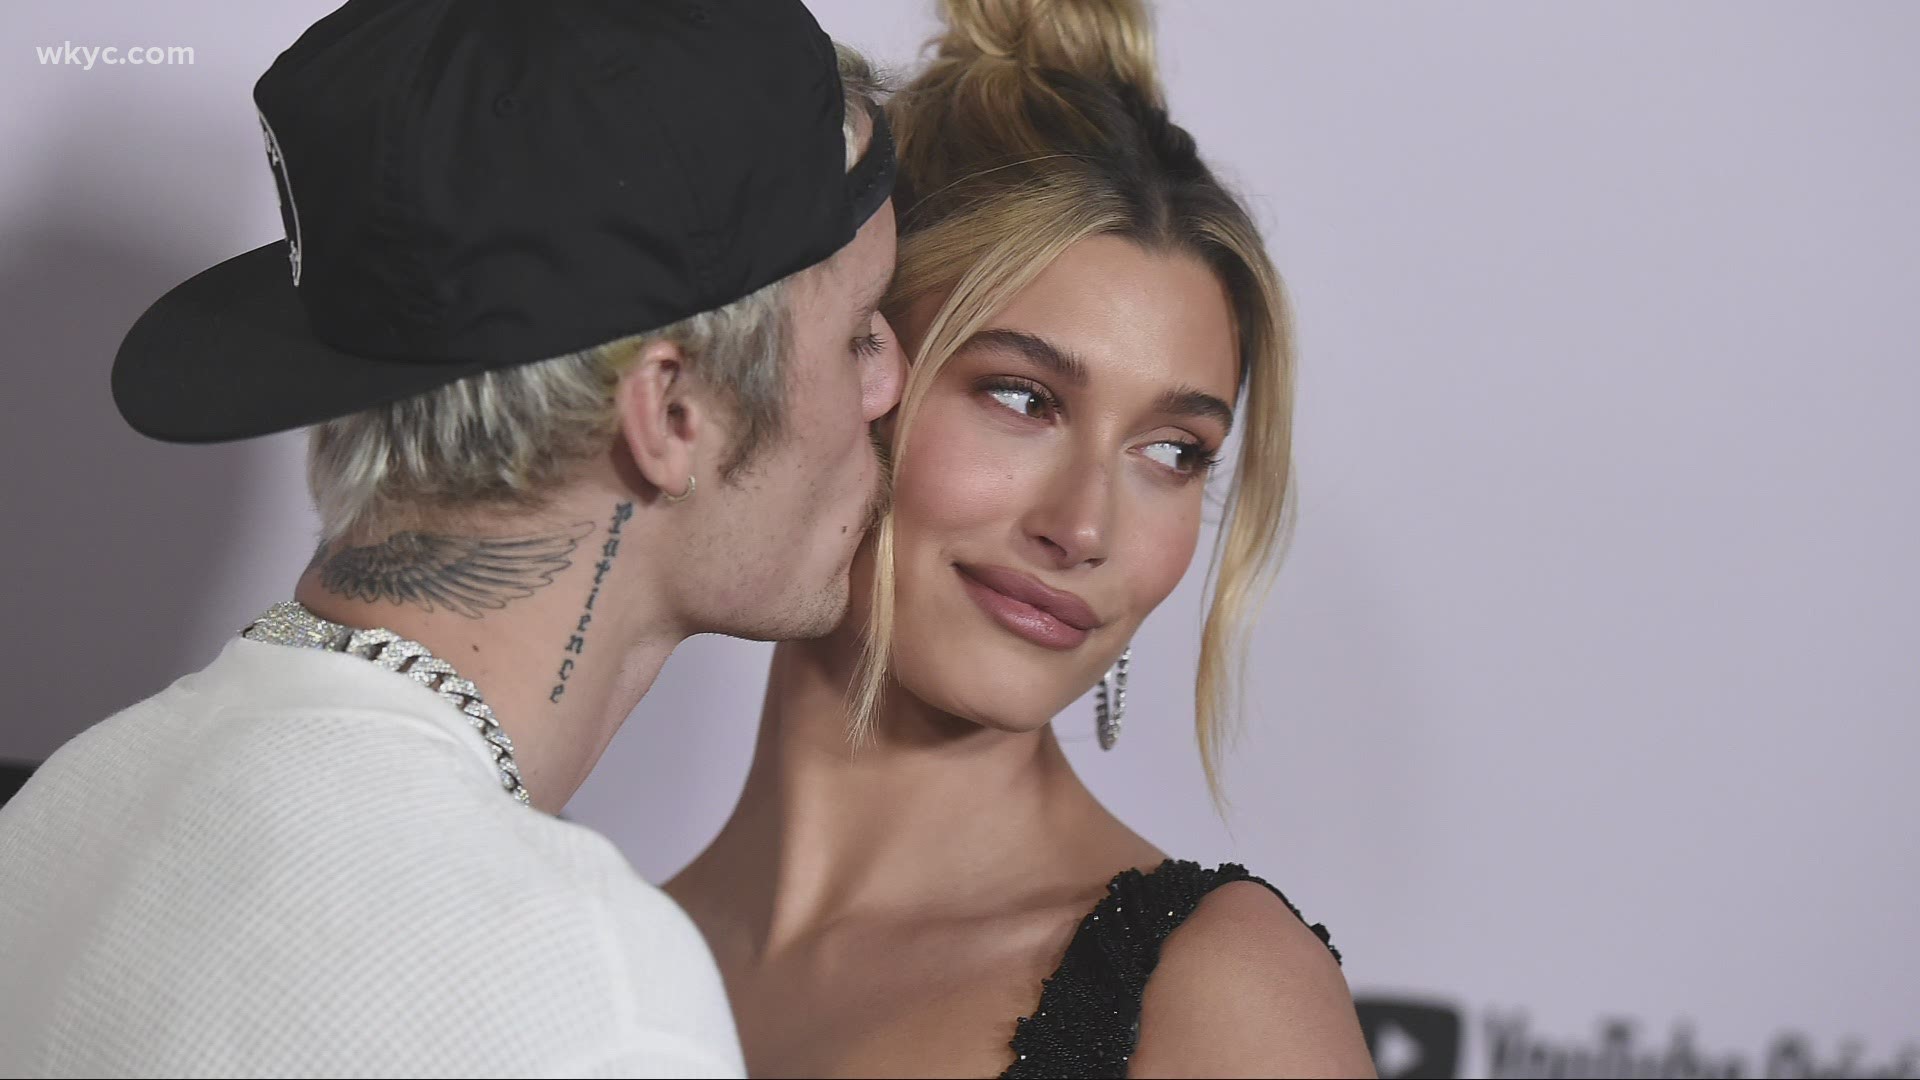 Model Hailey Bieber had to shut down pregnancy rumors after Justin's misleading Instagram caption.